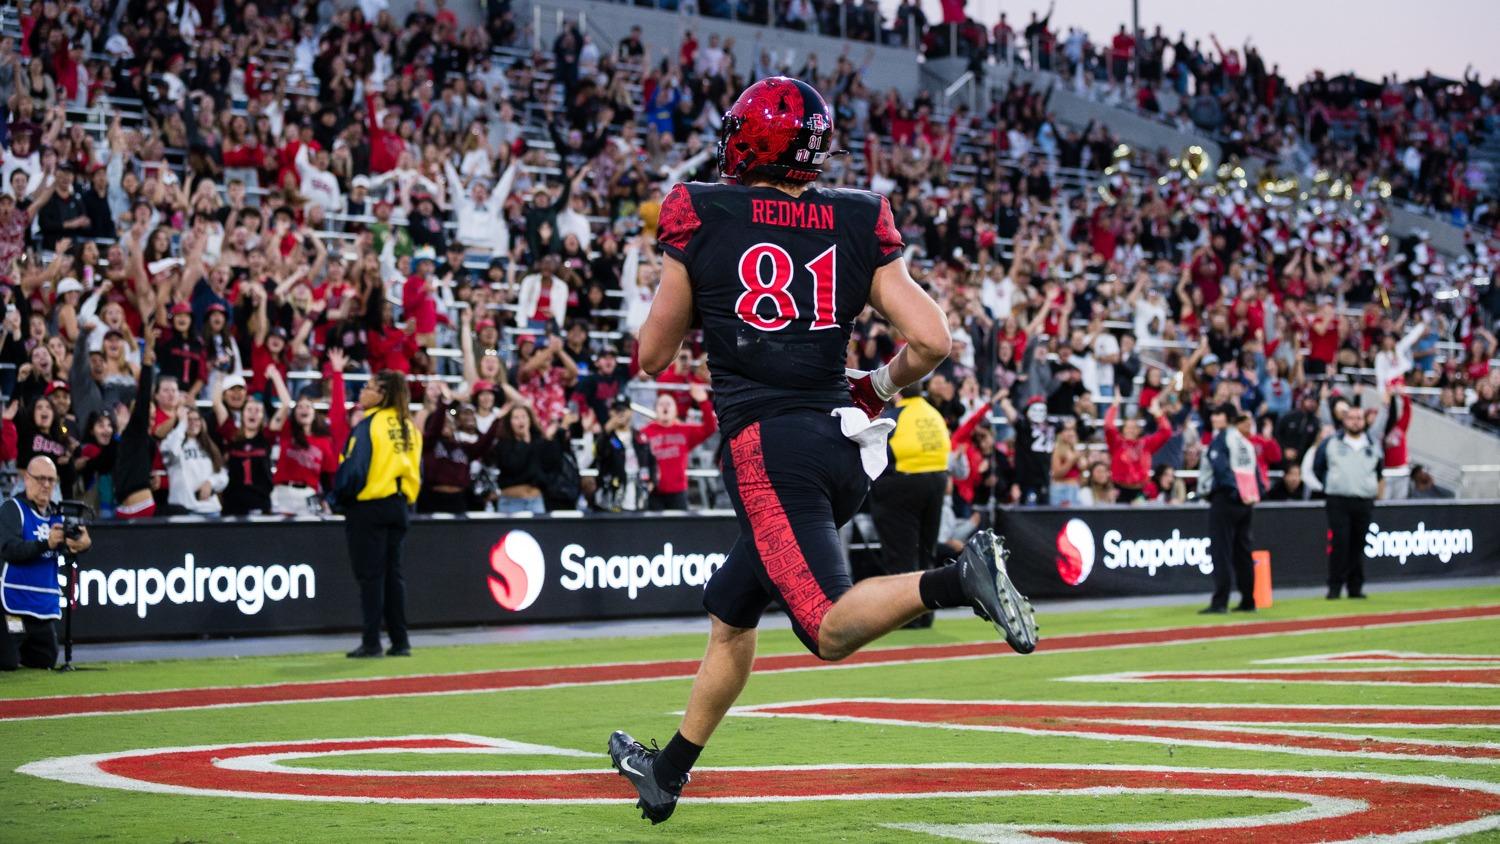 Mark Redman has proven to be a reliable receiving option the the San Diego State offense. Hula Bowl scout Hayden Russell breaks down Redman as an NFL Prospect in his report.